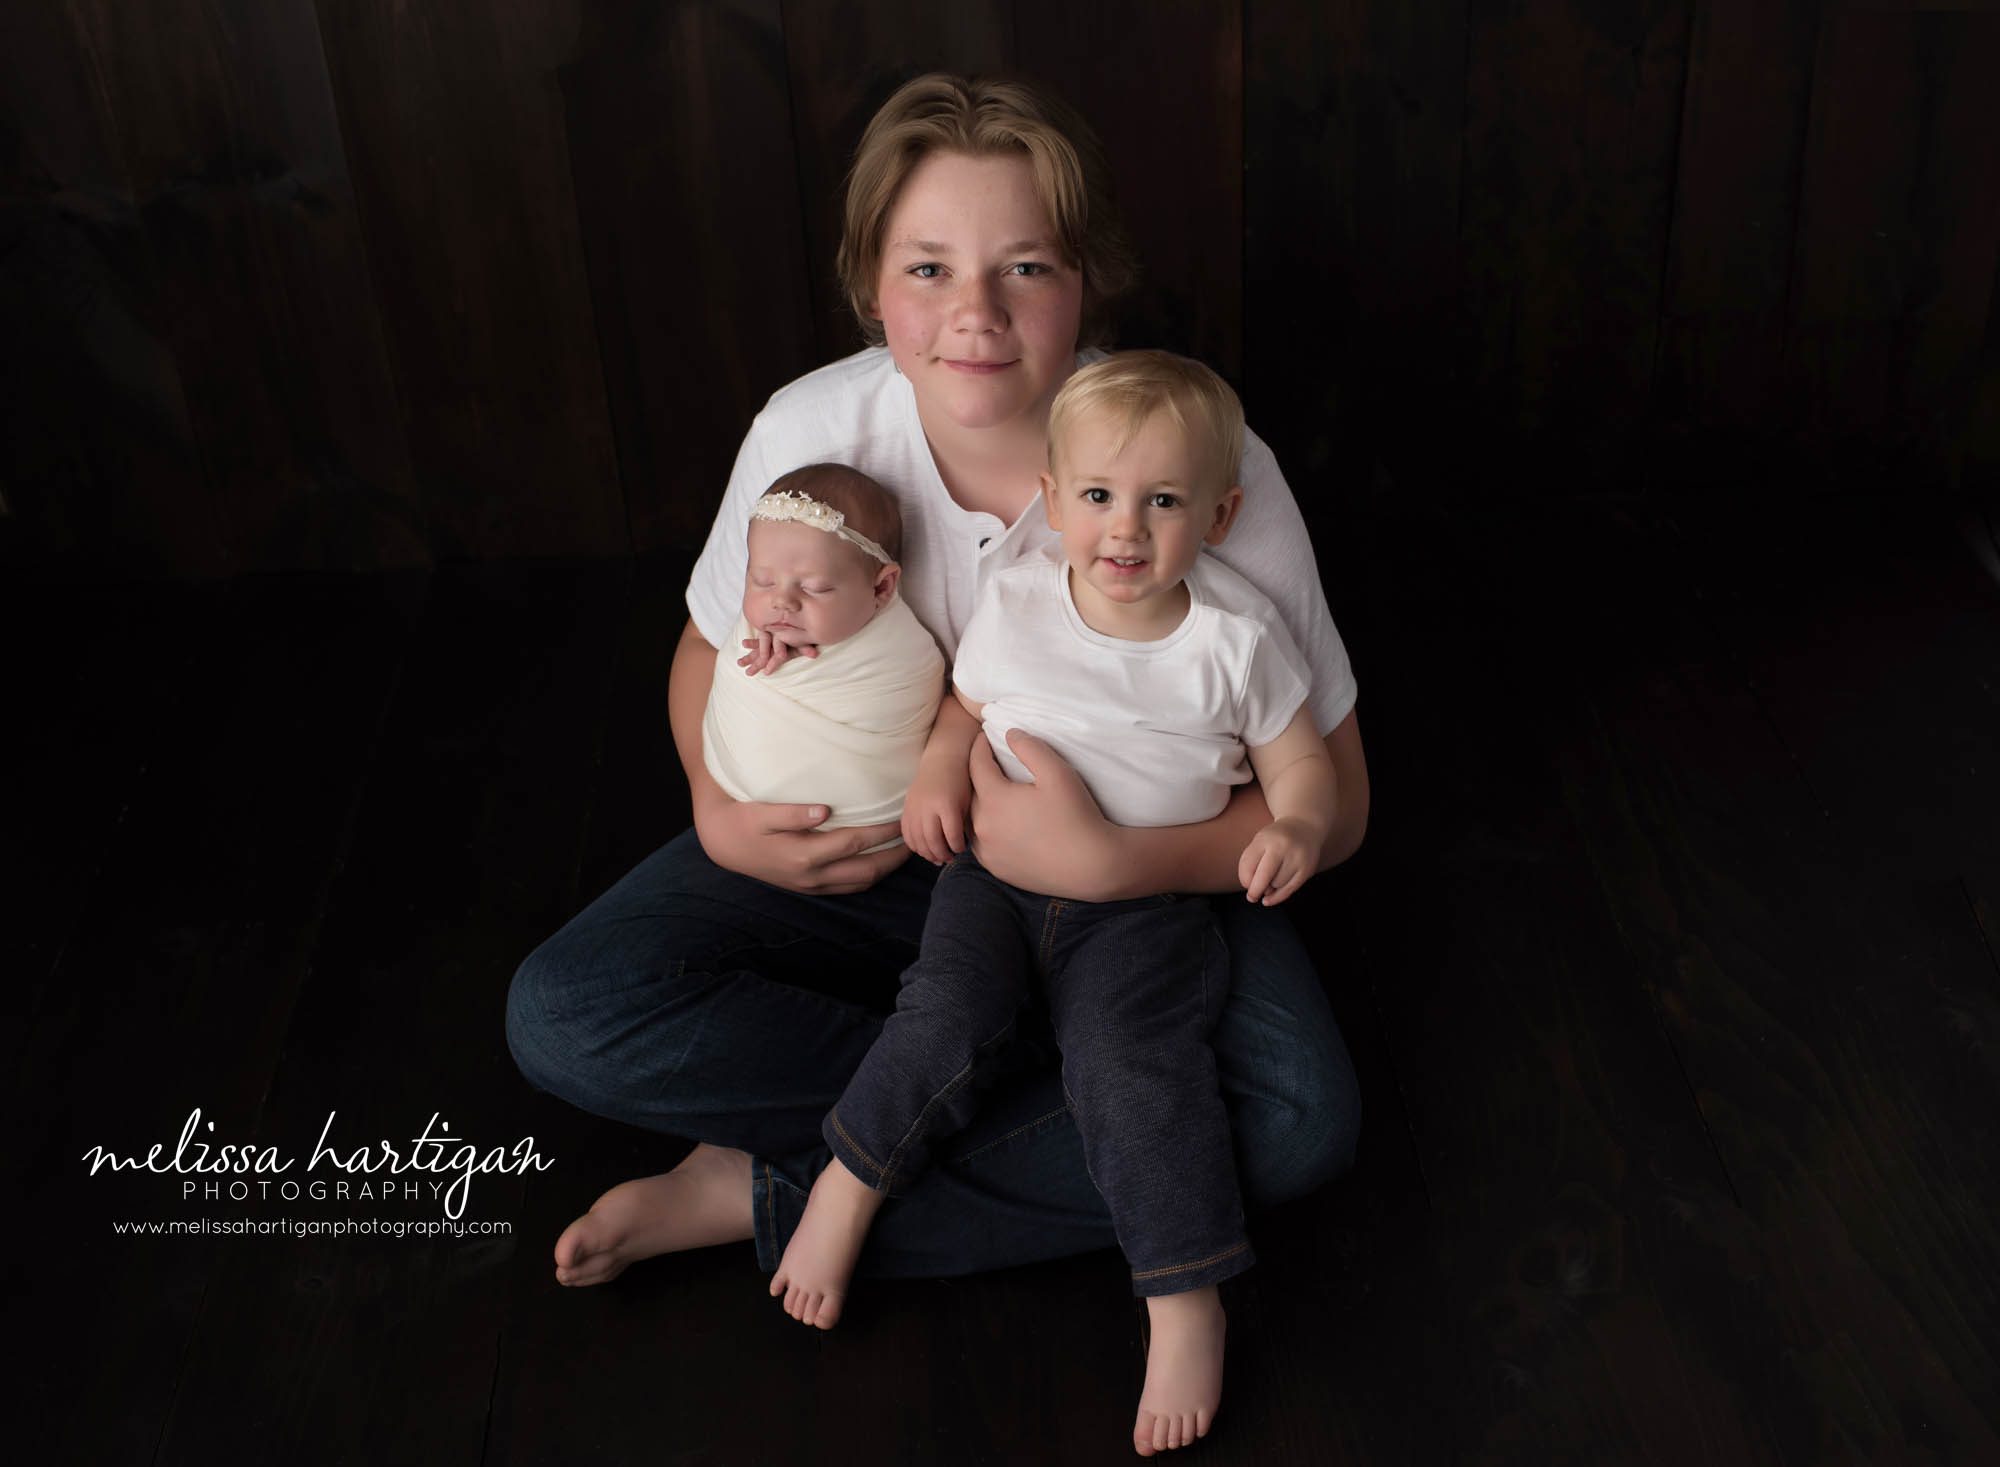 newborn baby girl posed sibling pose with two older brothers family picture newborn photography hartford county